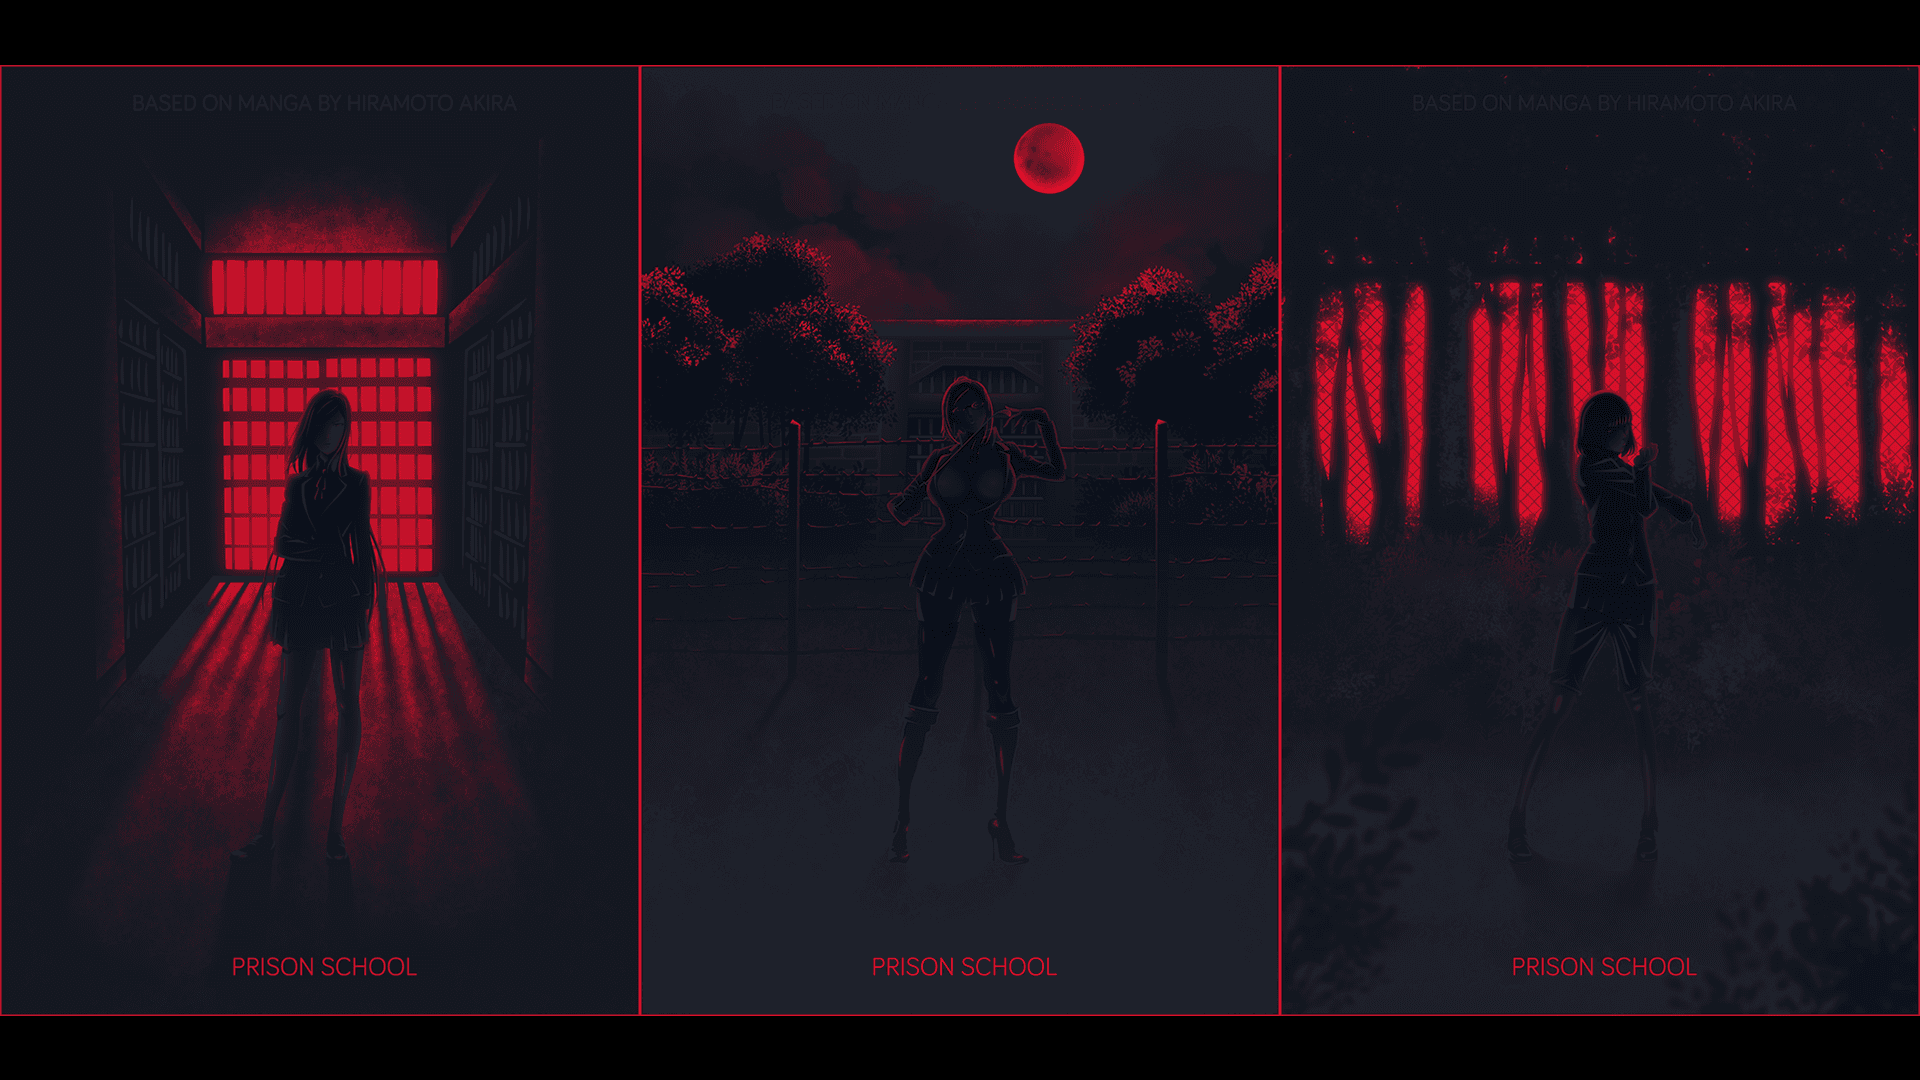 A Series Of Posters With A Woman Standing In The Dark